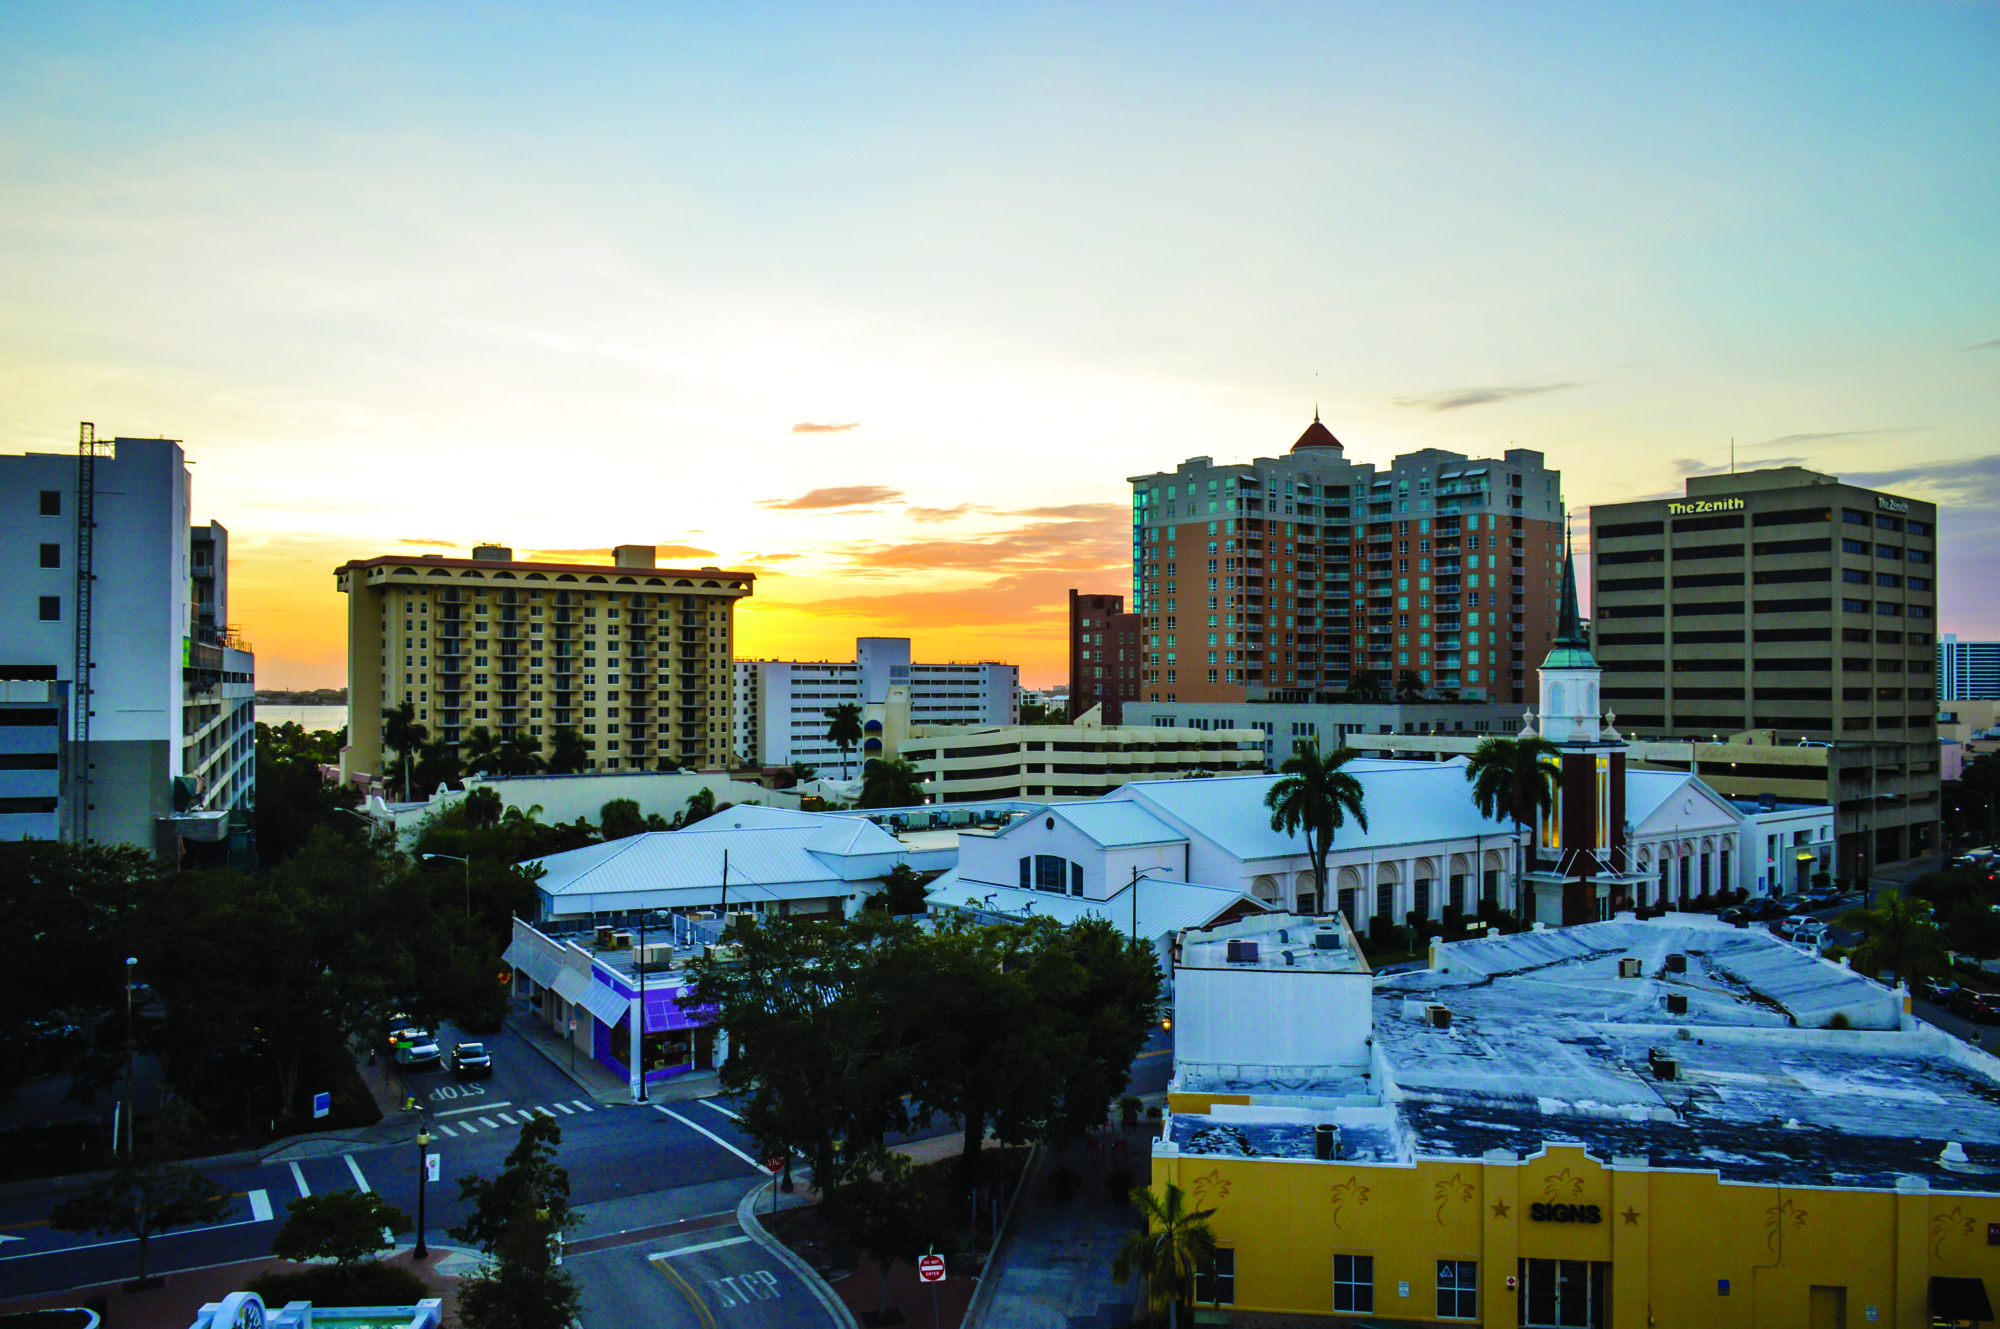 Sarasota was ranked No. 18 of 125 metropolitan areas in the country for the best places to live.